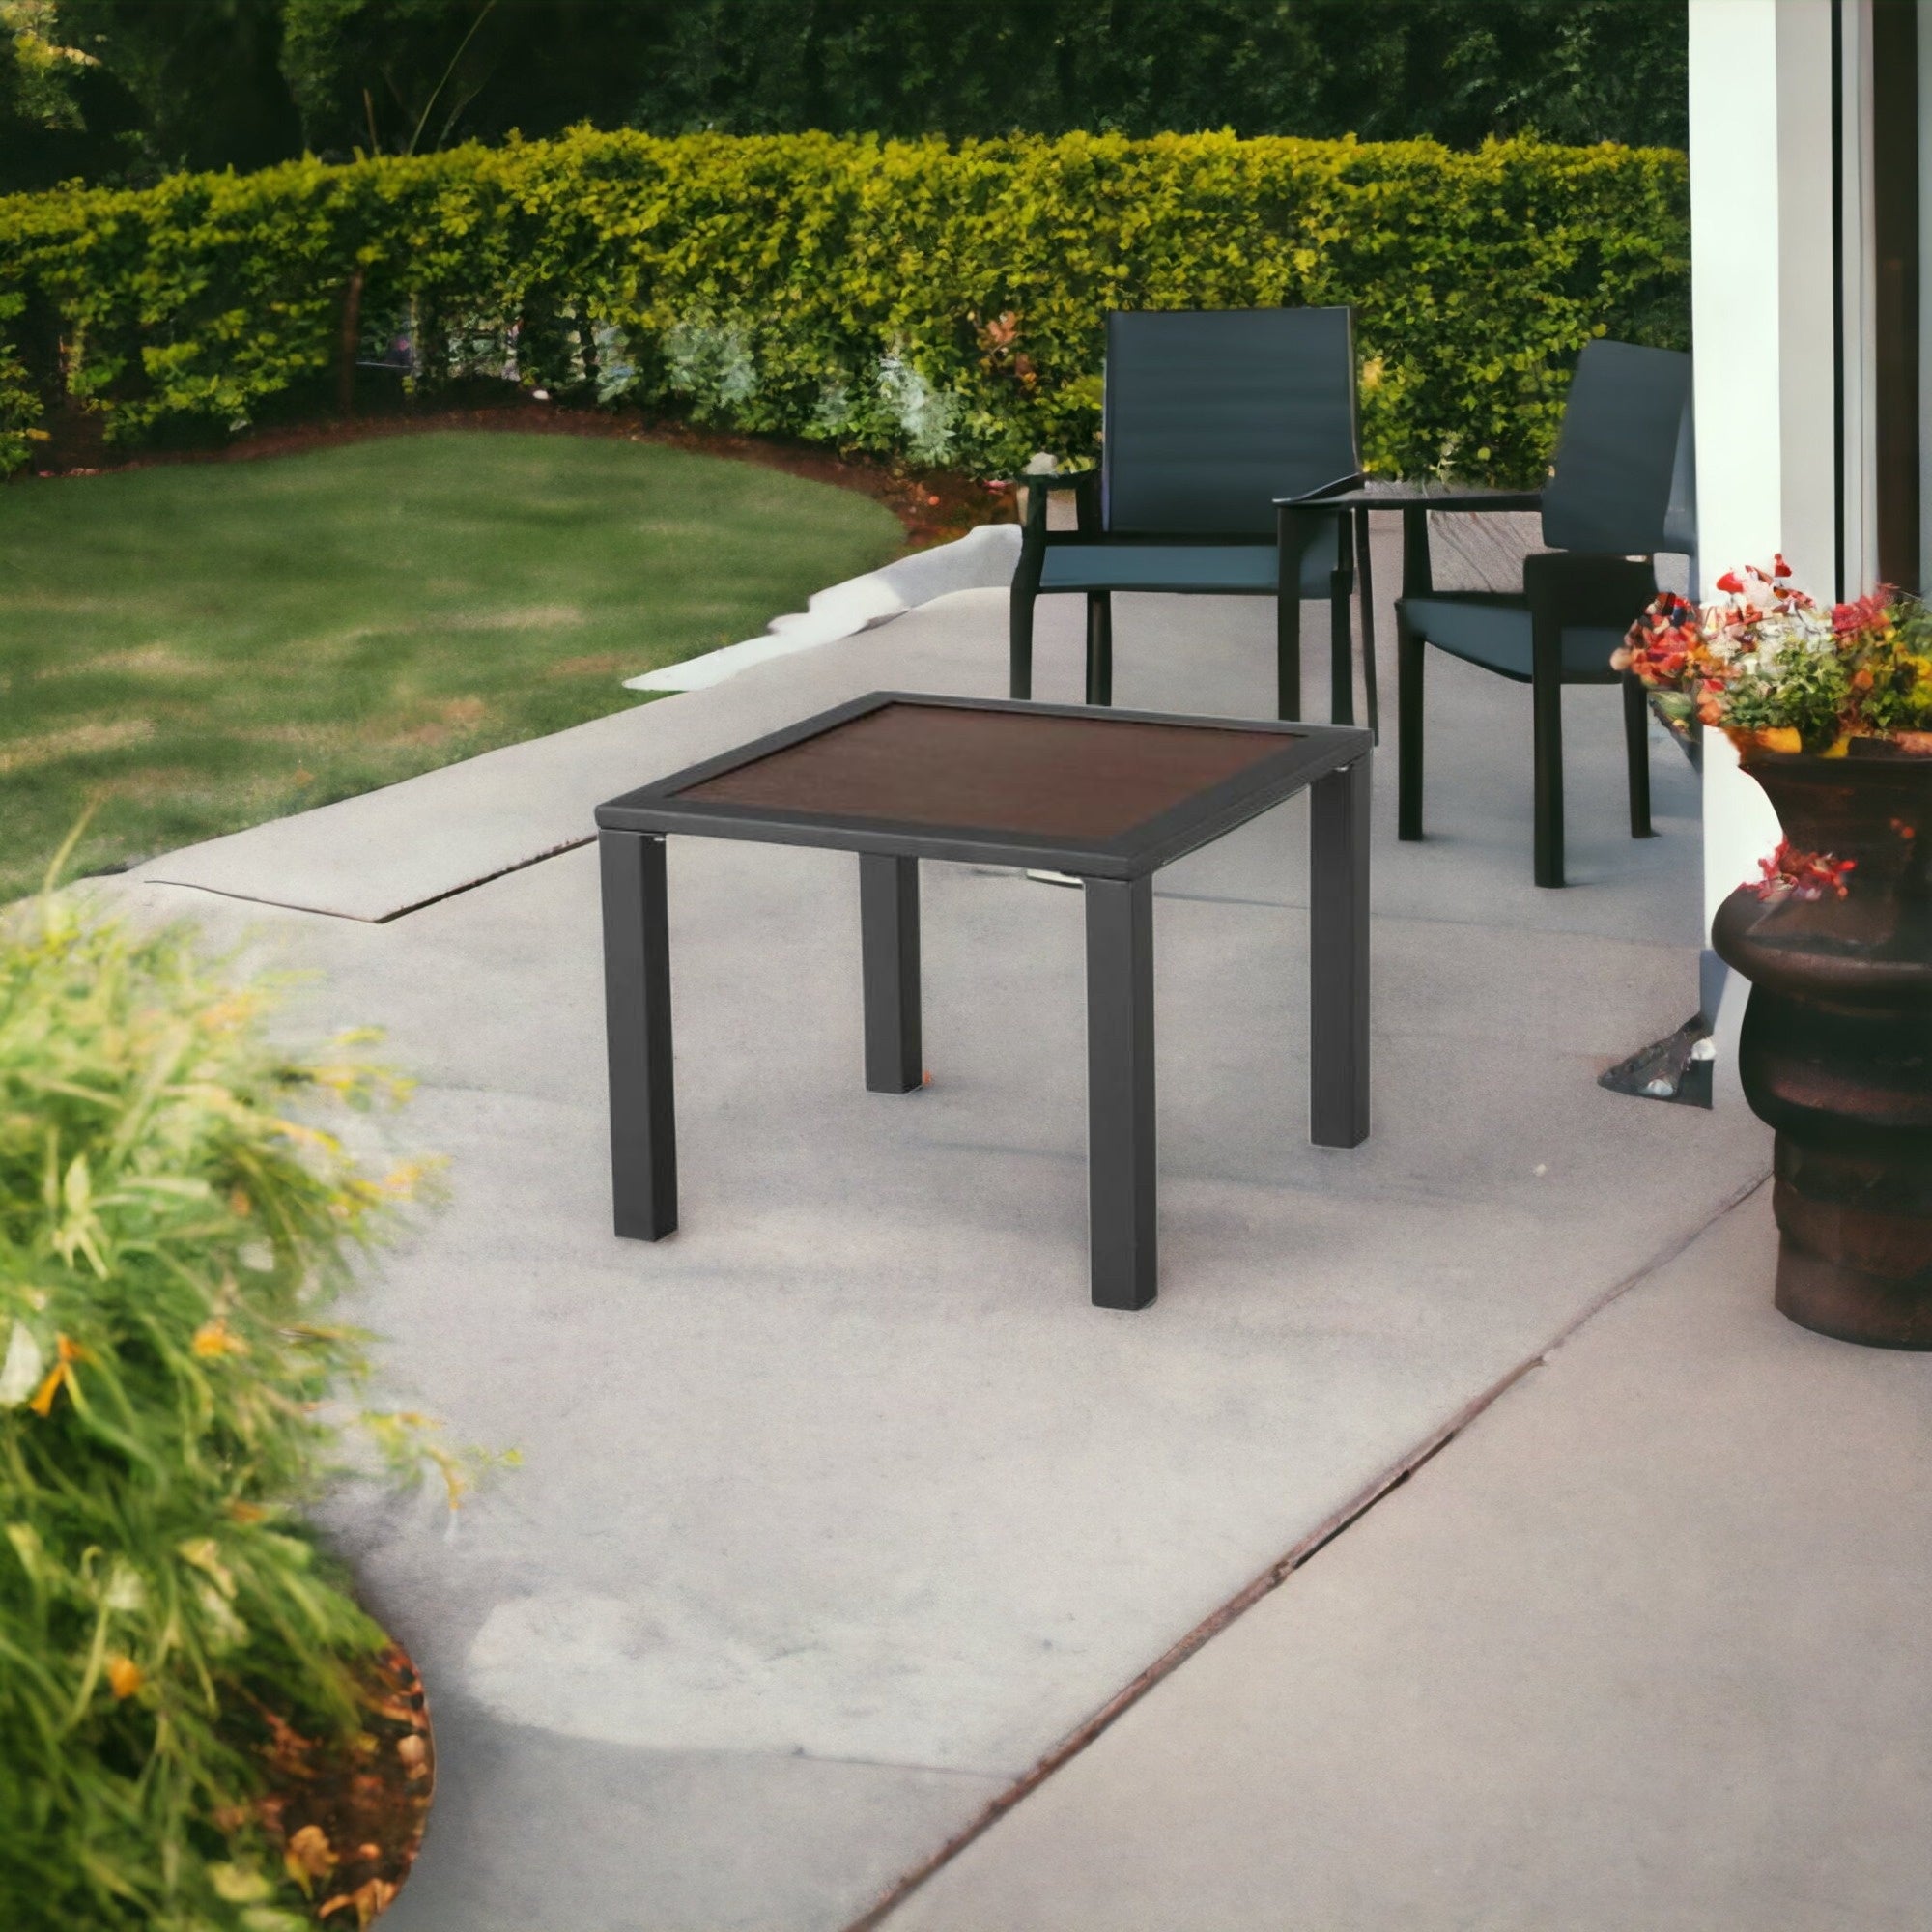 21" Brown and Black Square Metal Outdoor Side Table